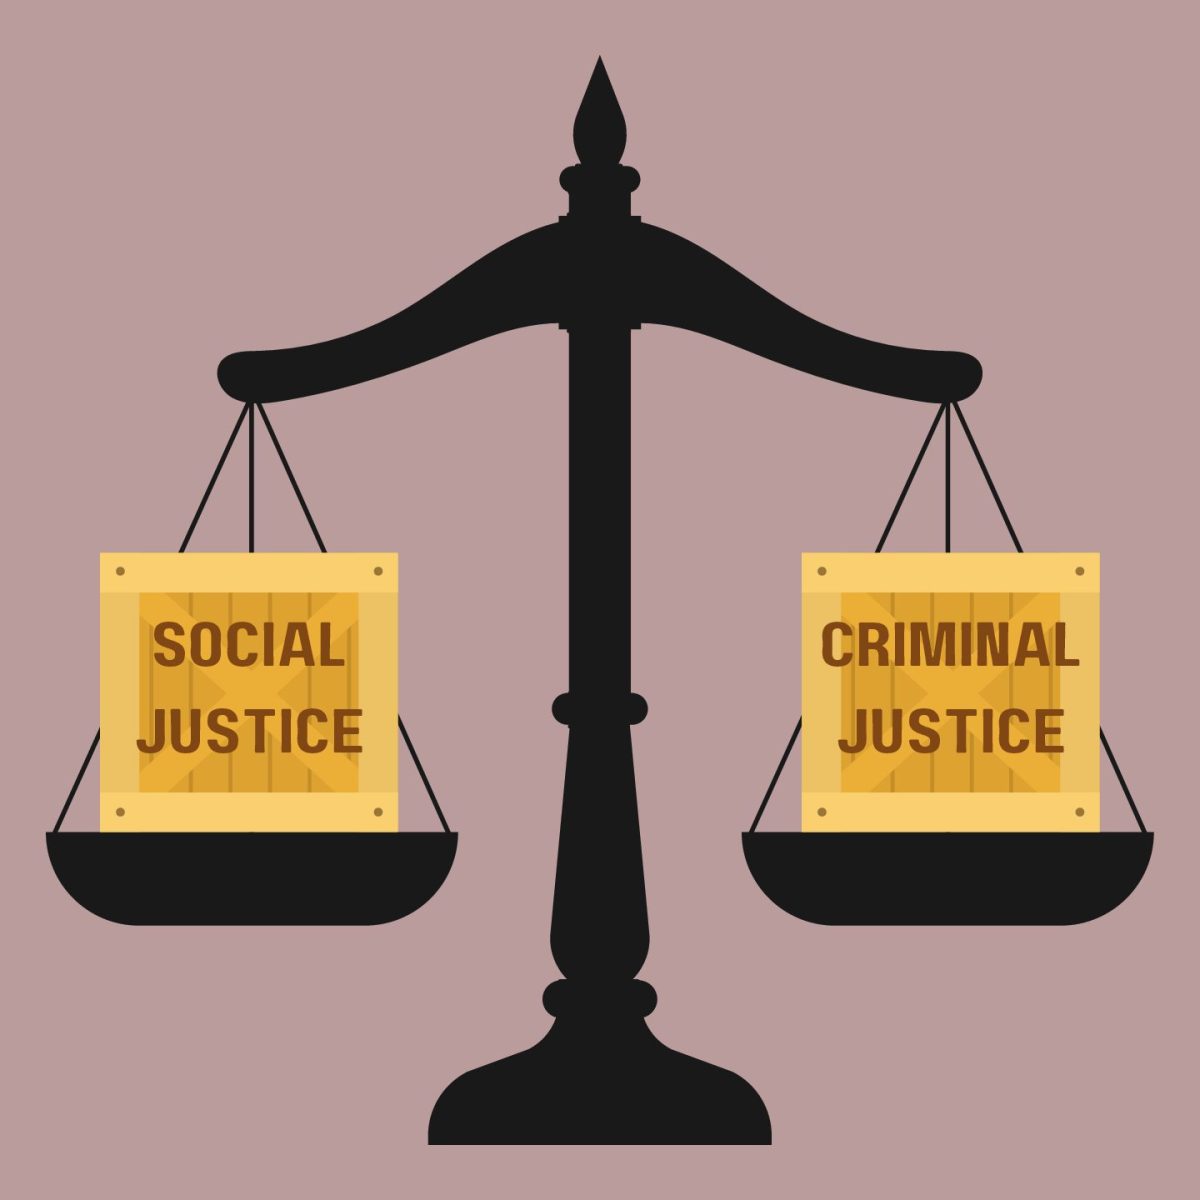 The criminal justice system is being fought against every day by the citizens of the United States of America. People are trying to make changes in the criminal justice system because of how unjust it is.